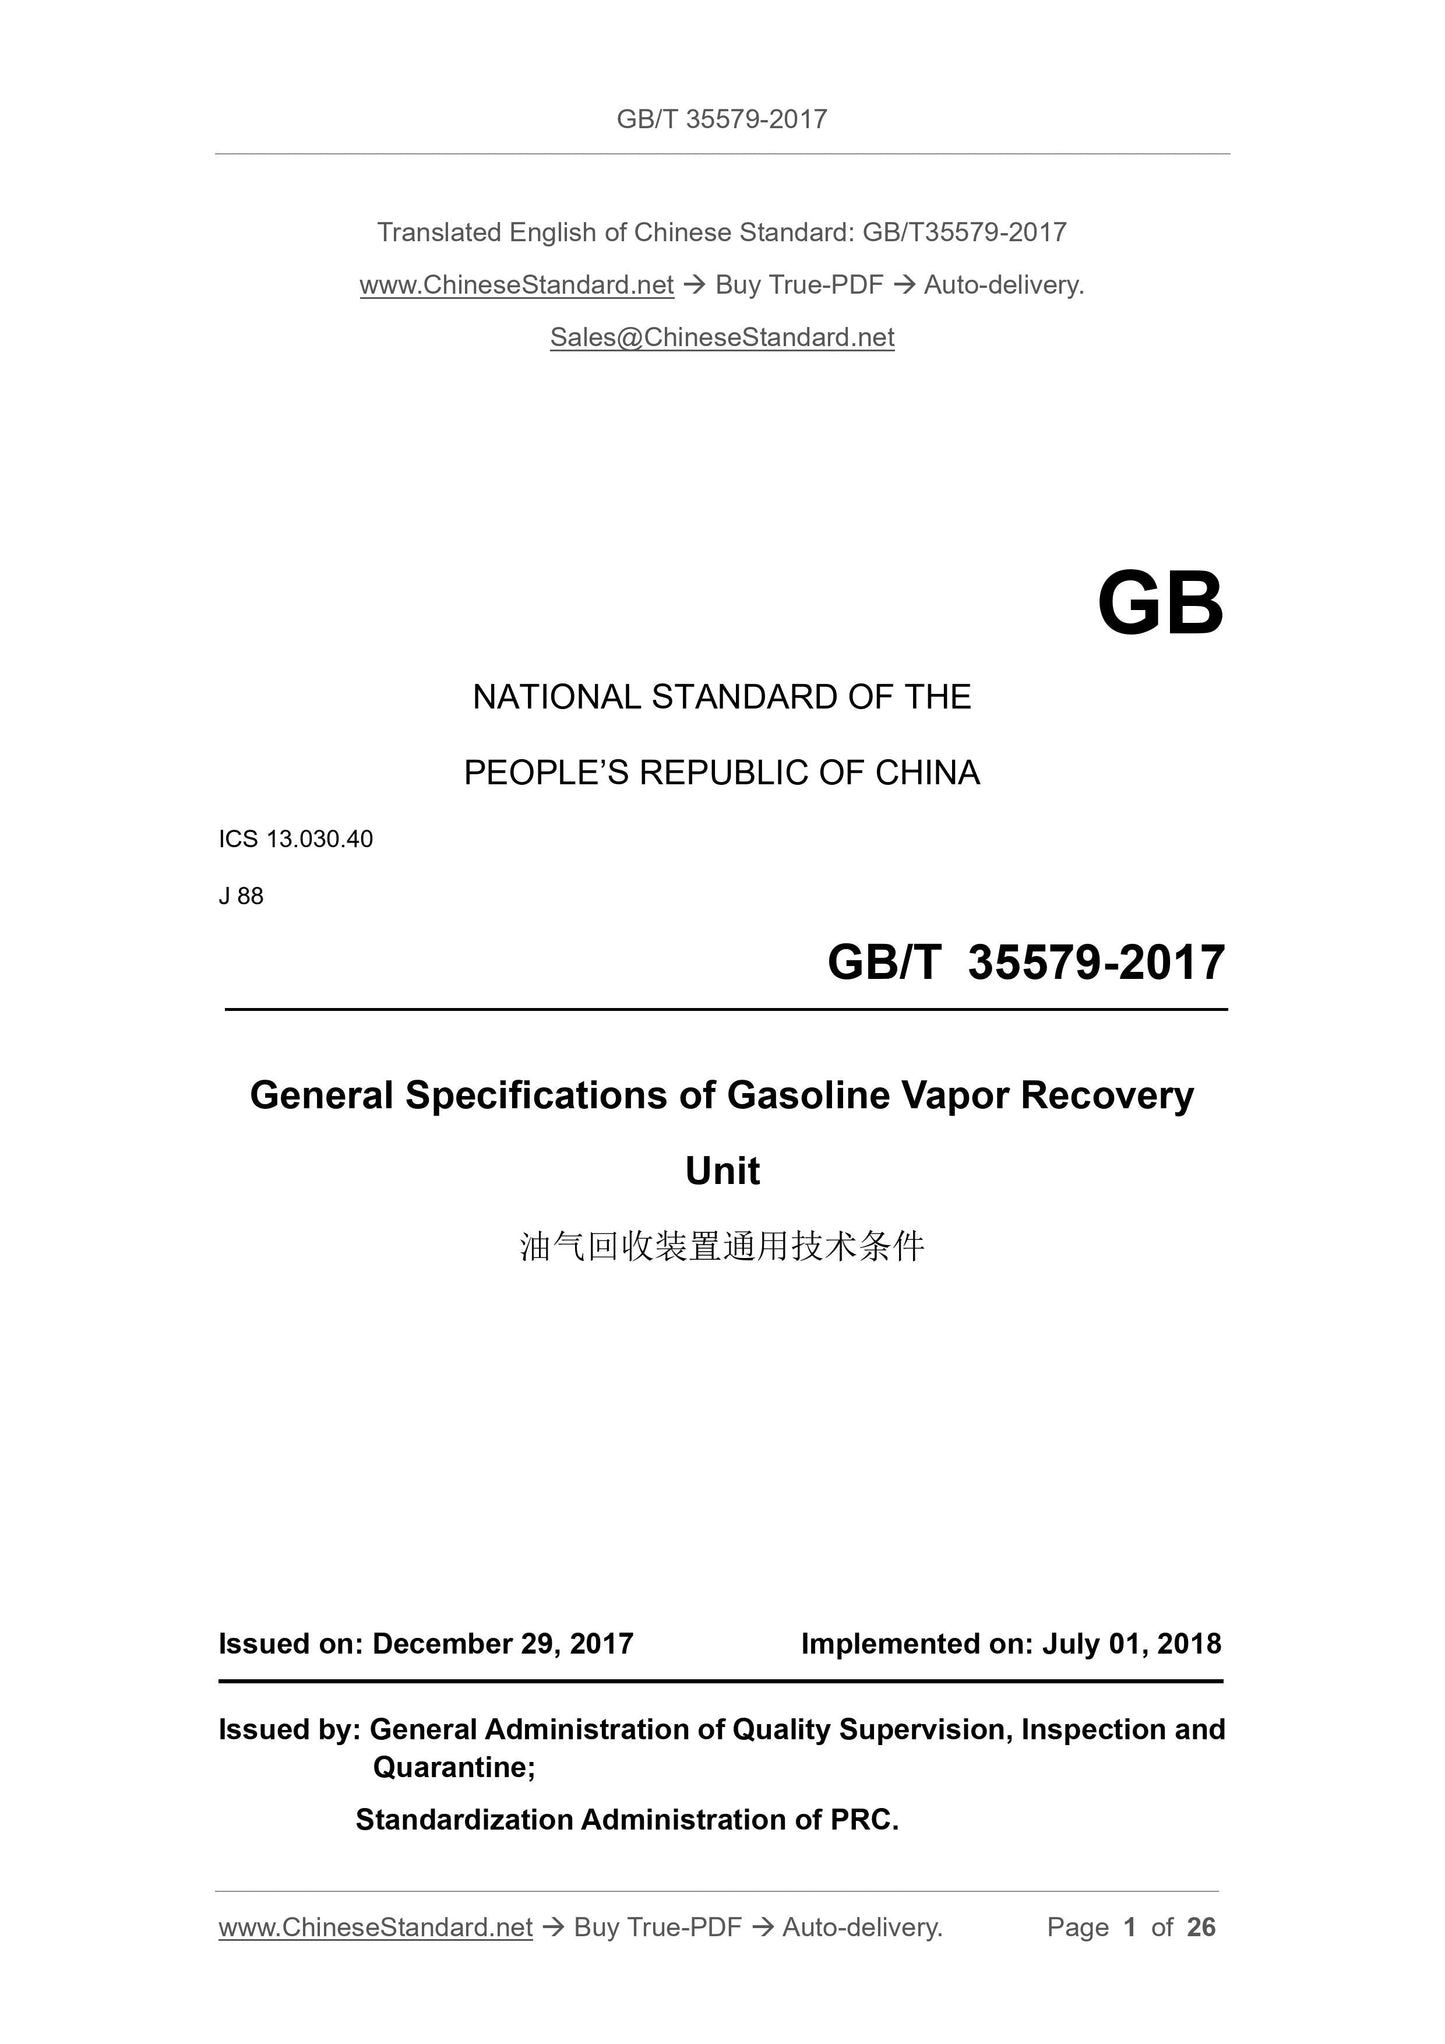 GB/T 35579-2017 Page 1